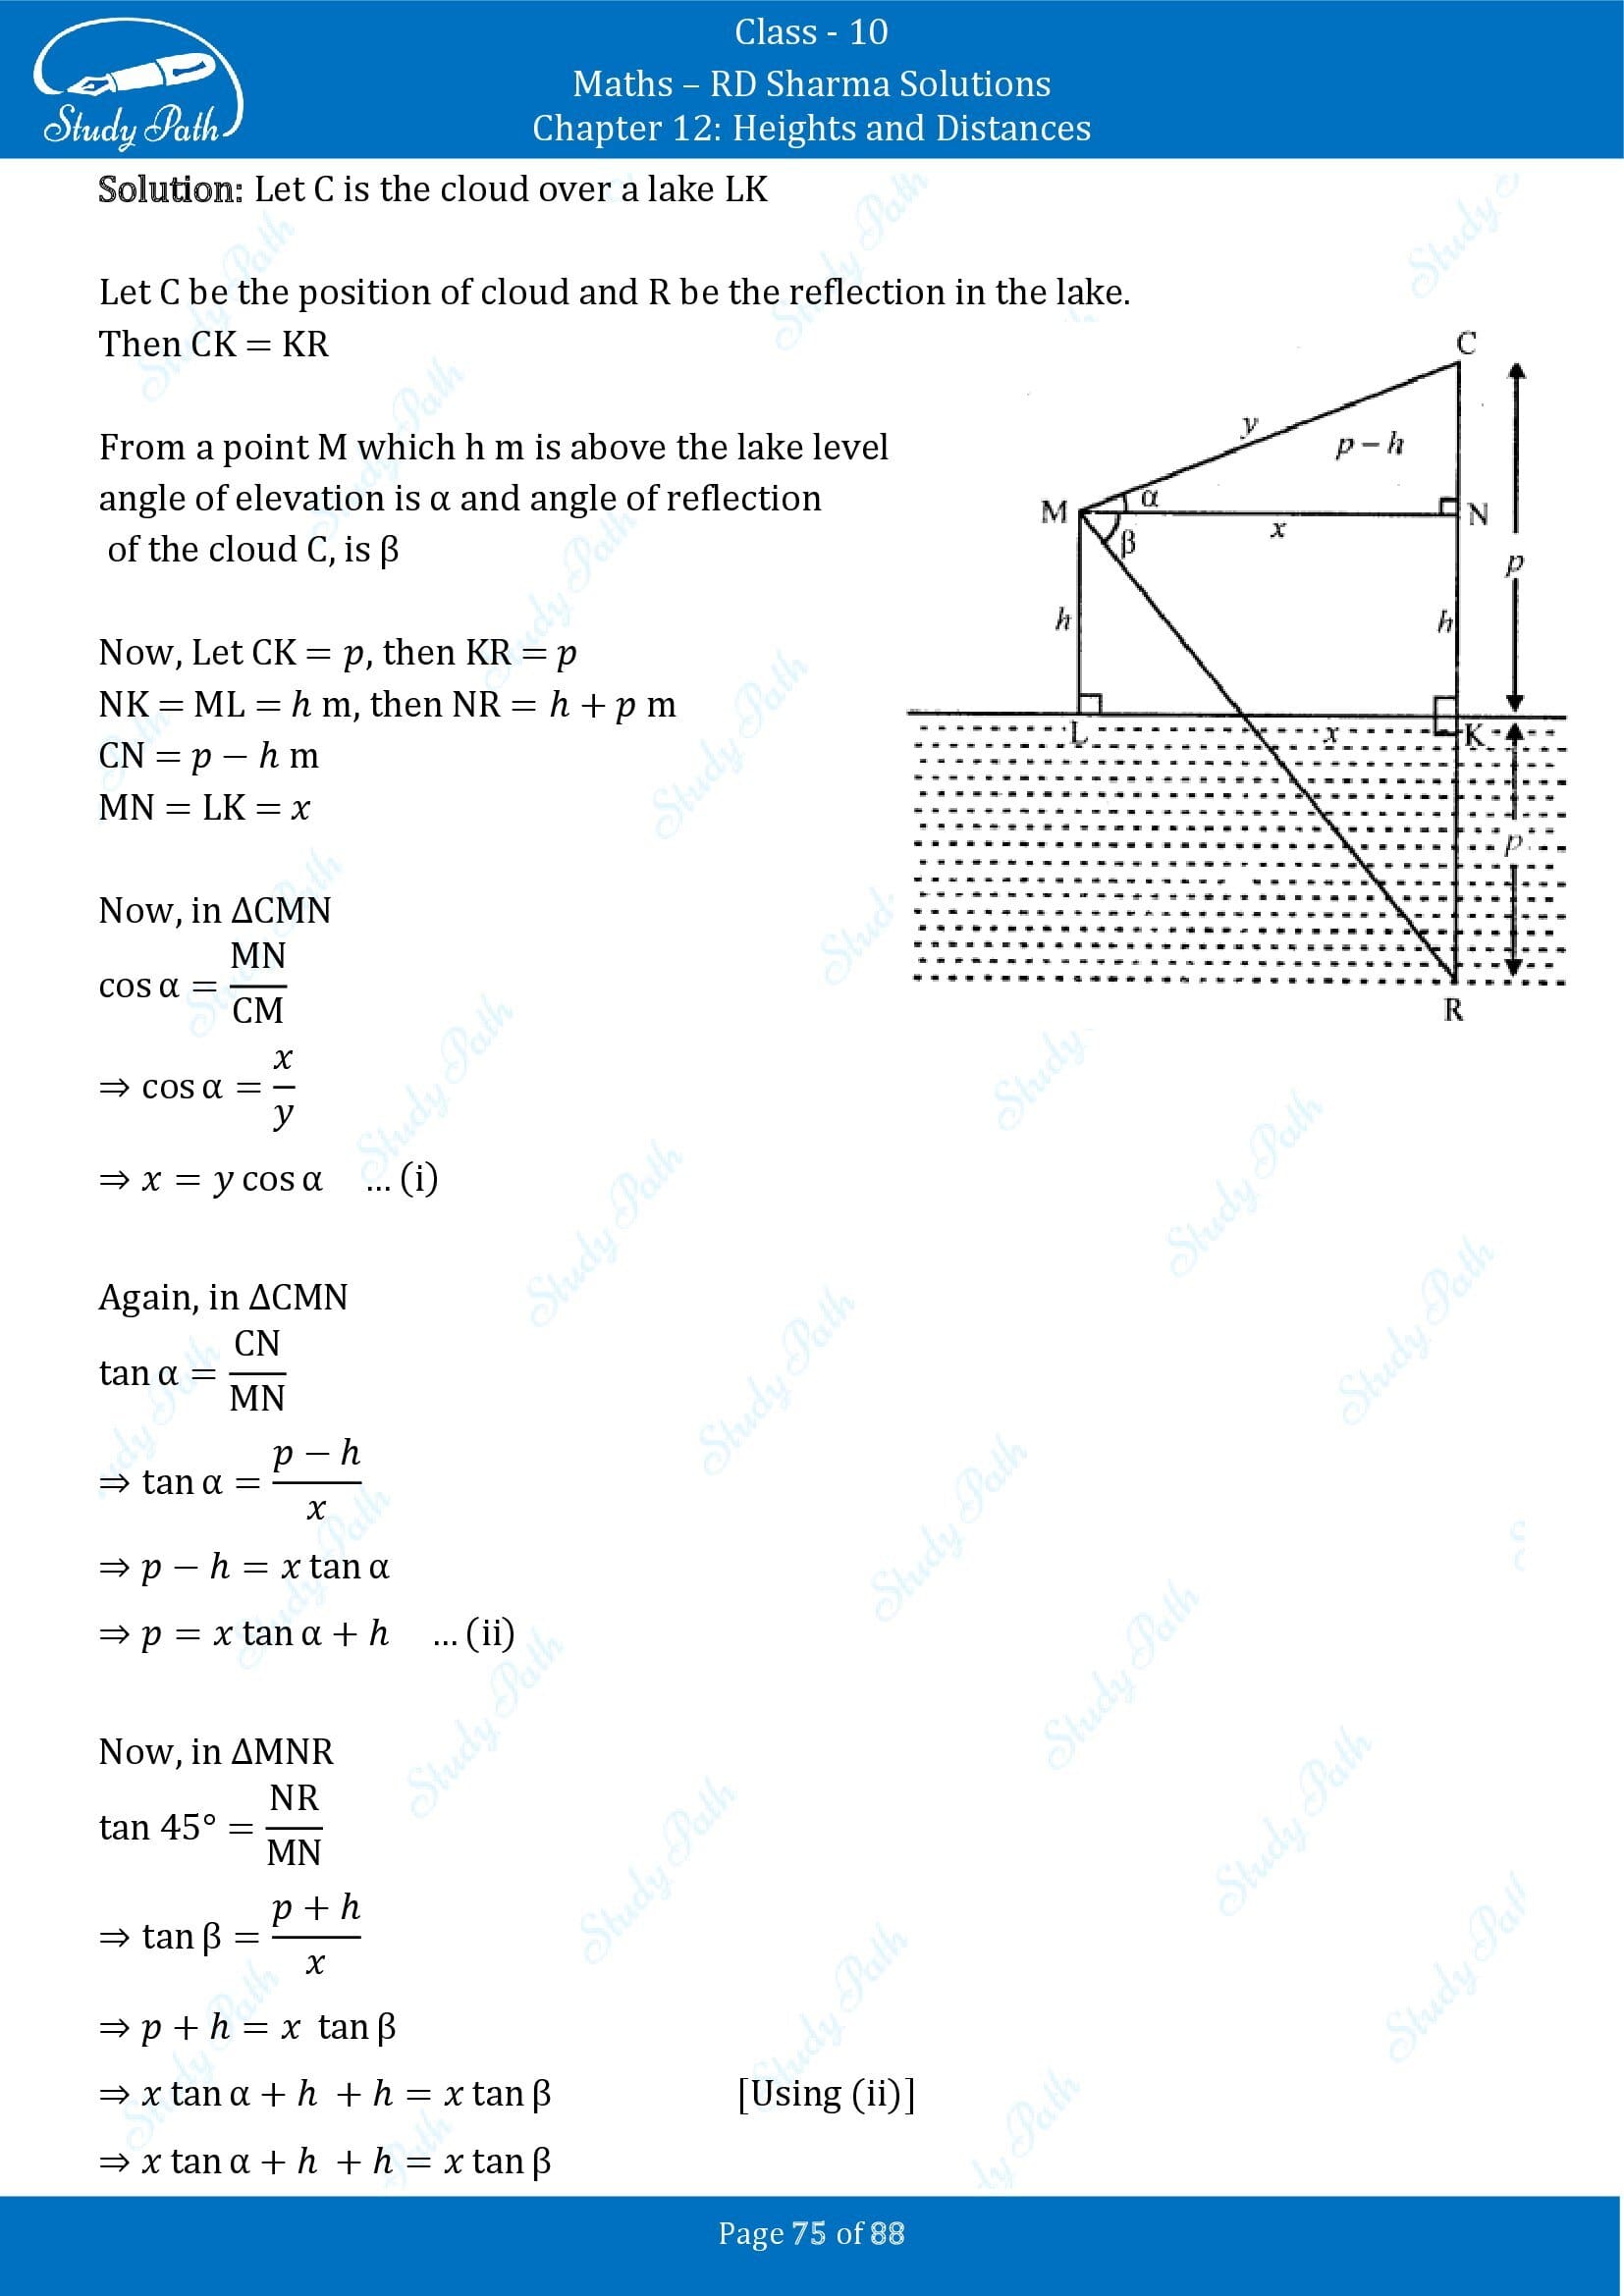 RD Sharma Solutions Class 10 Chapter 12 Heights and Distances Exercise 12.1 00075